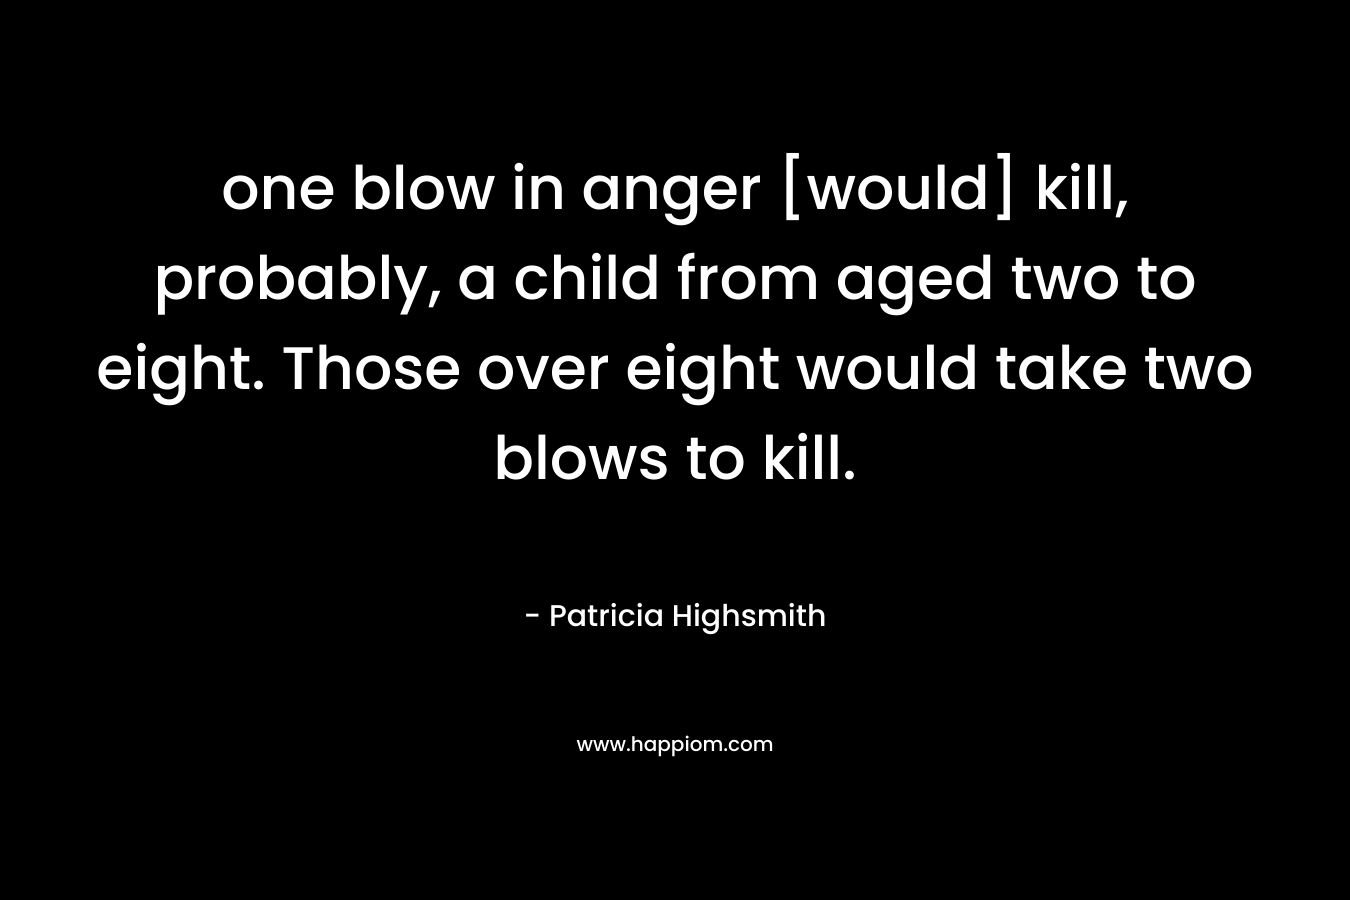 one blow in anger [would] kill, probably, a child from aged two to eight. Those over eight would take two blows to kill.